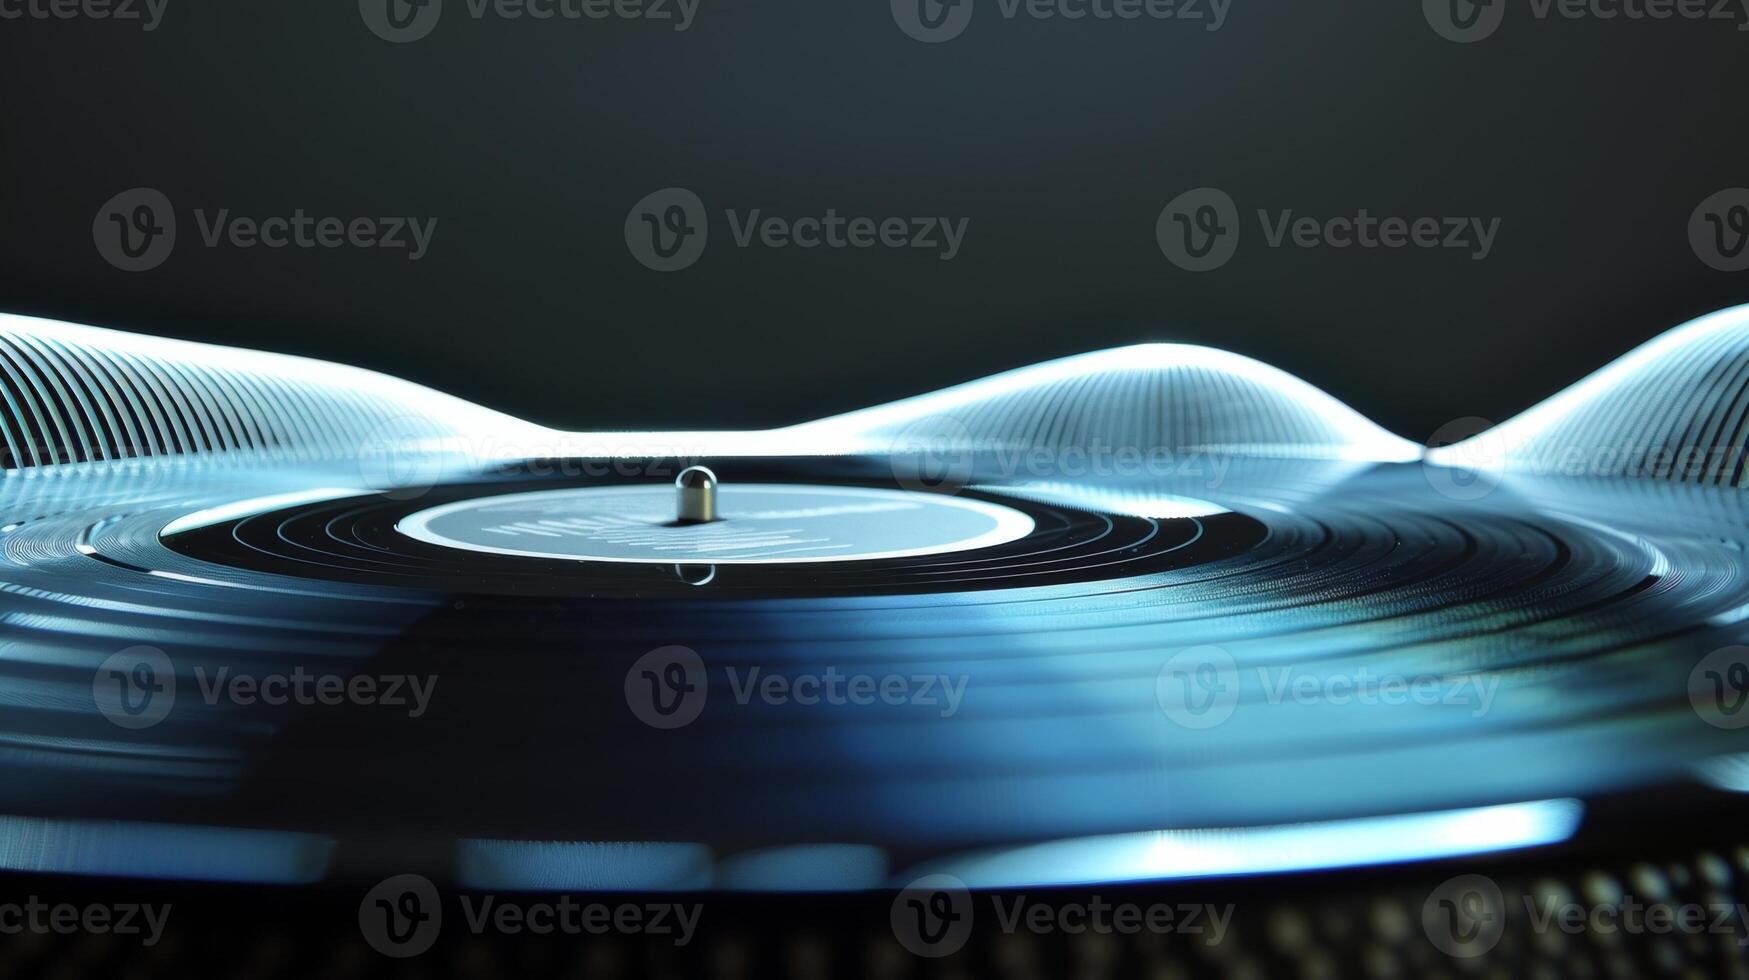 The sound waves of a vinyl record being played can be seen on a sound graph display photo